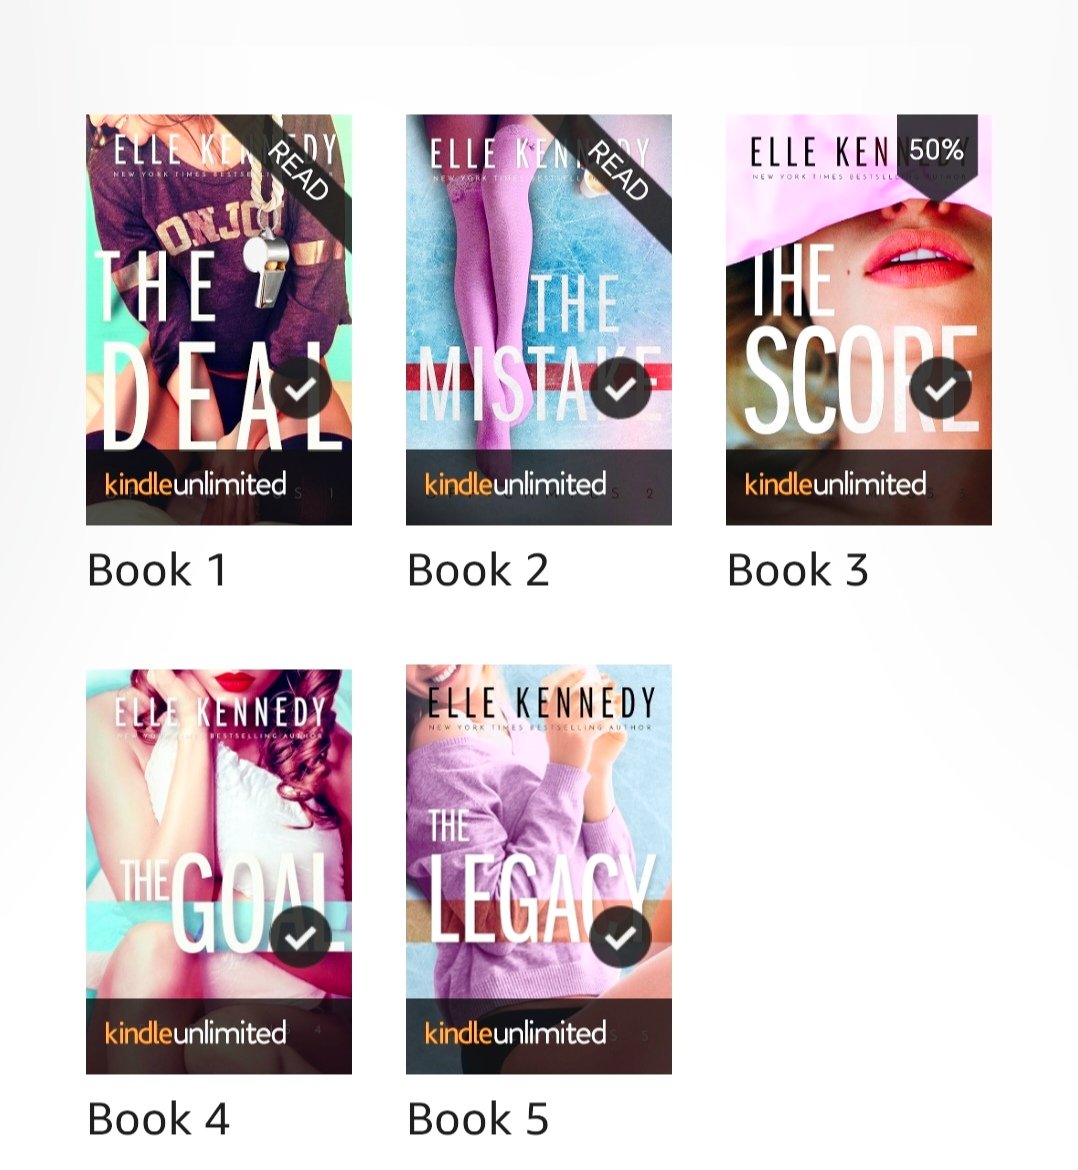 Halfway through Off Campus series by Elle Kennedy 😭😭😭

These books are way too addicting 😍😍 I'm loving them so much 

#currentlyreading #booktwt #bookblogger #bookblogging